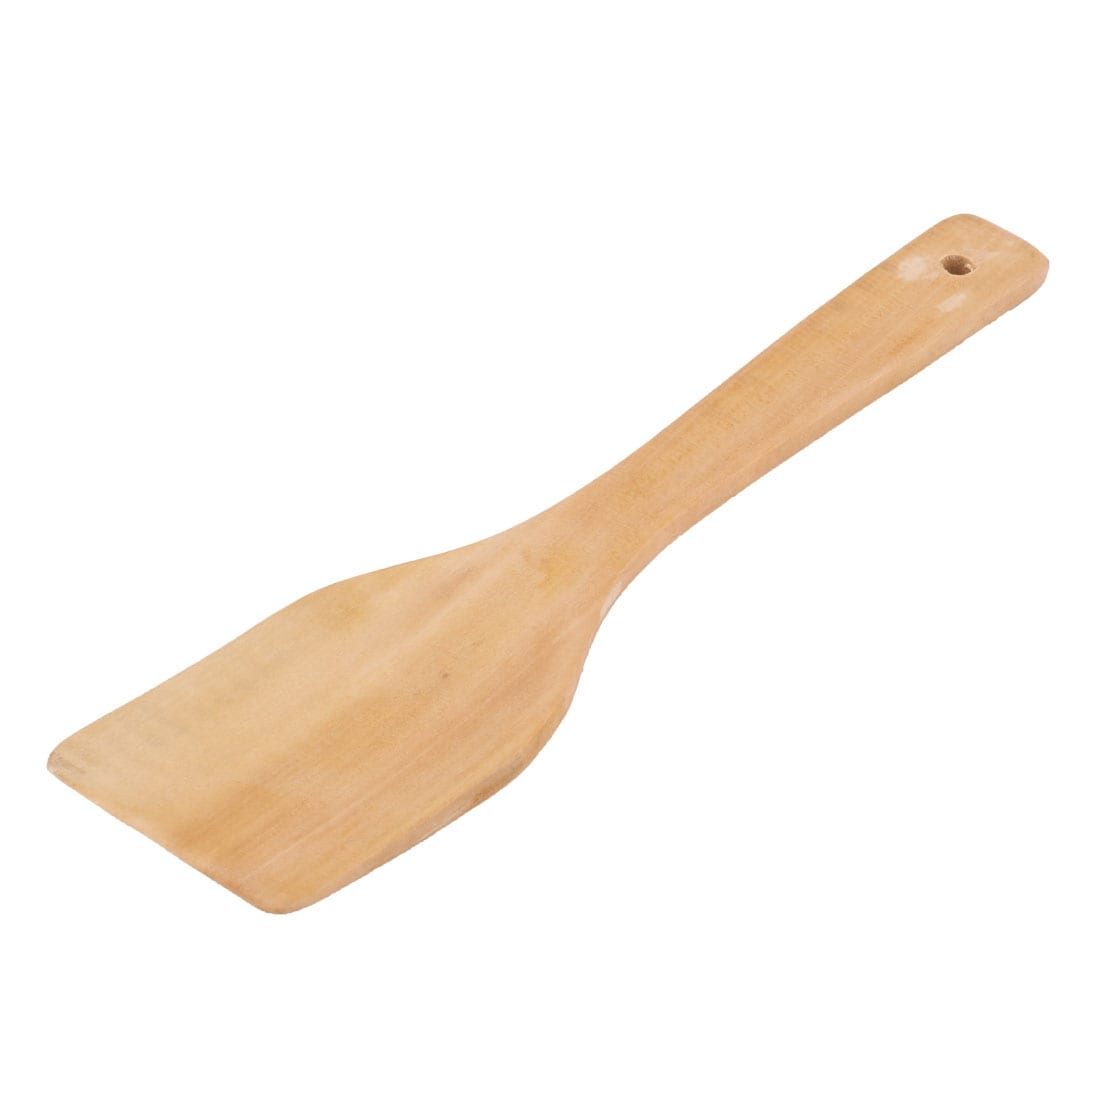 https://ak1.ostkcdn.com/images/products/is/images/direct/46c9940bc9dadebe24b78596d6a30fb116caf3f1/Kitchen-Wood-Flat-Cooking-Serving-Spatula-Rice-Spoon-Paddle-Ladle.jpg